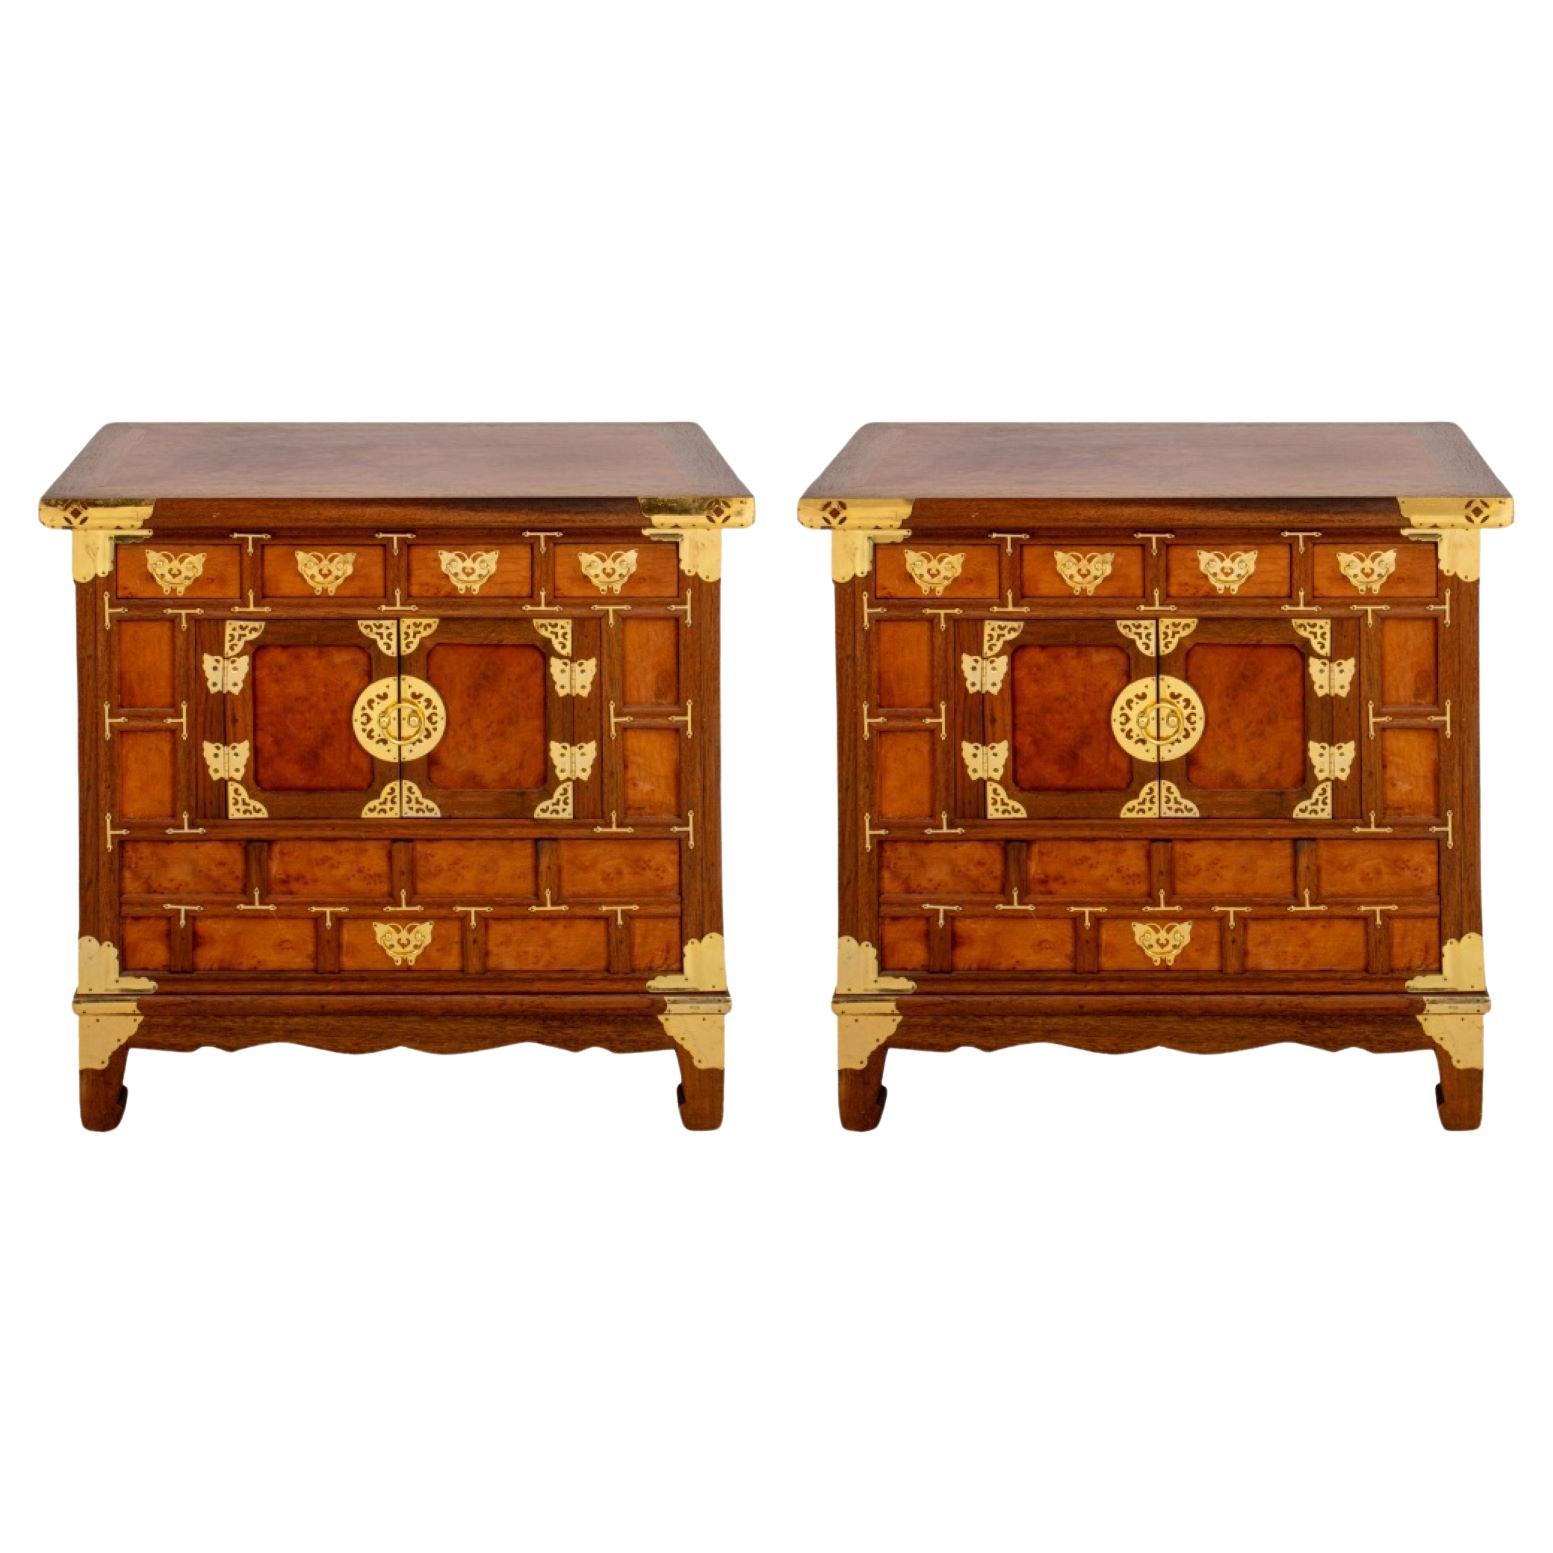 Japanese Brass-Mounted Yew Wood Cabinets, 2